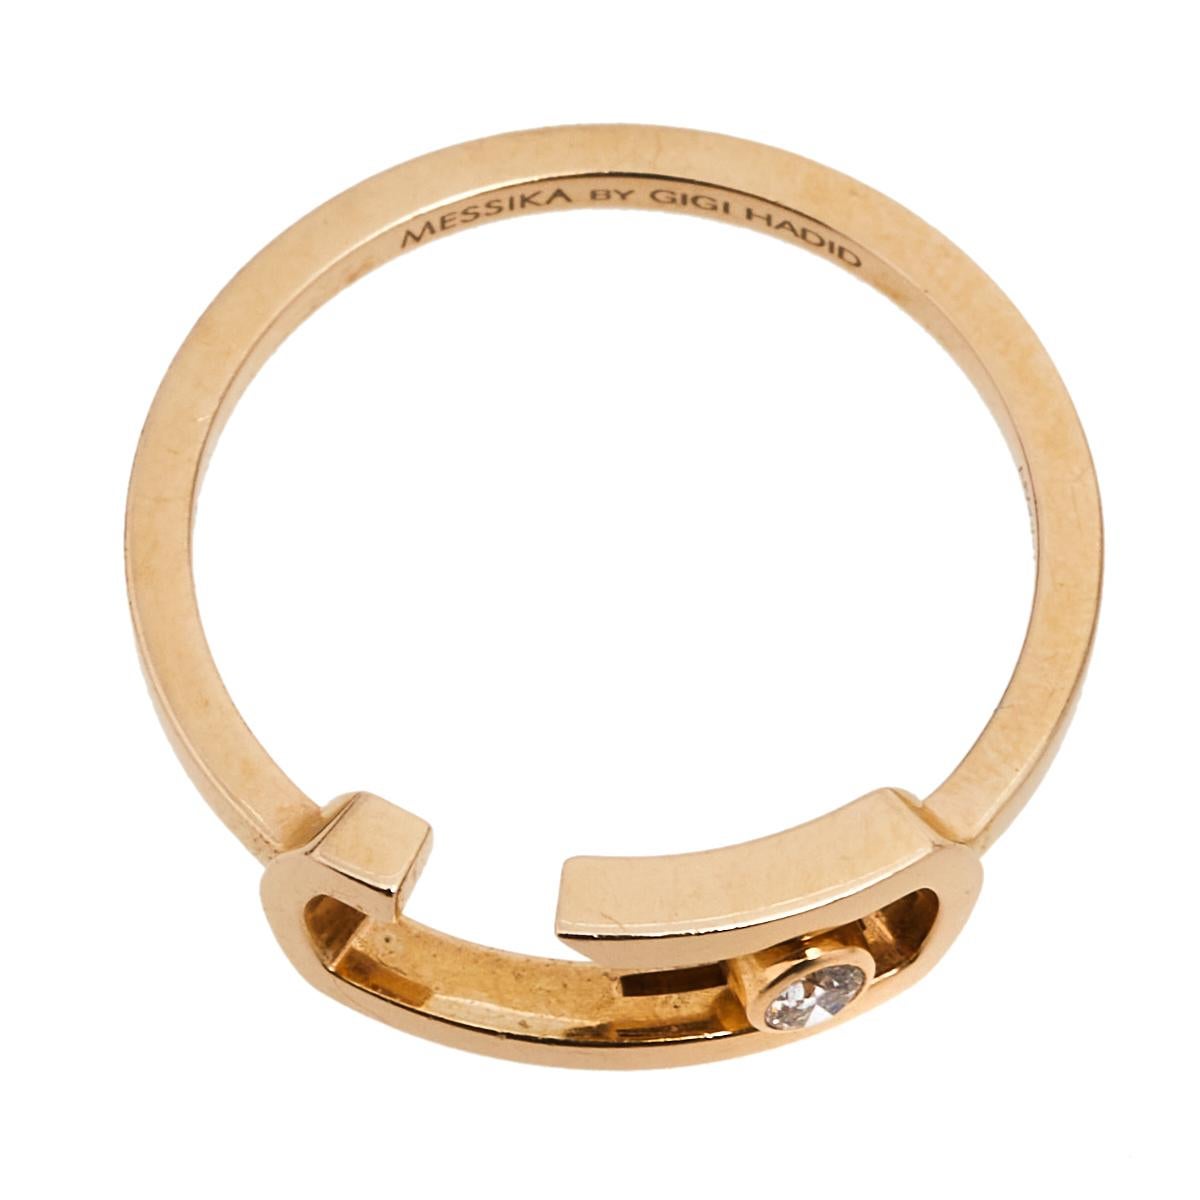 Supermodel Gigi Hadid first collaborated with Messika in 2017 and reimagined the Move collection which has designs that are both wearable and timeless. From the Move Addiction range comes this wondrous thing of beauty. It is handmade from 18k rose